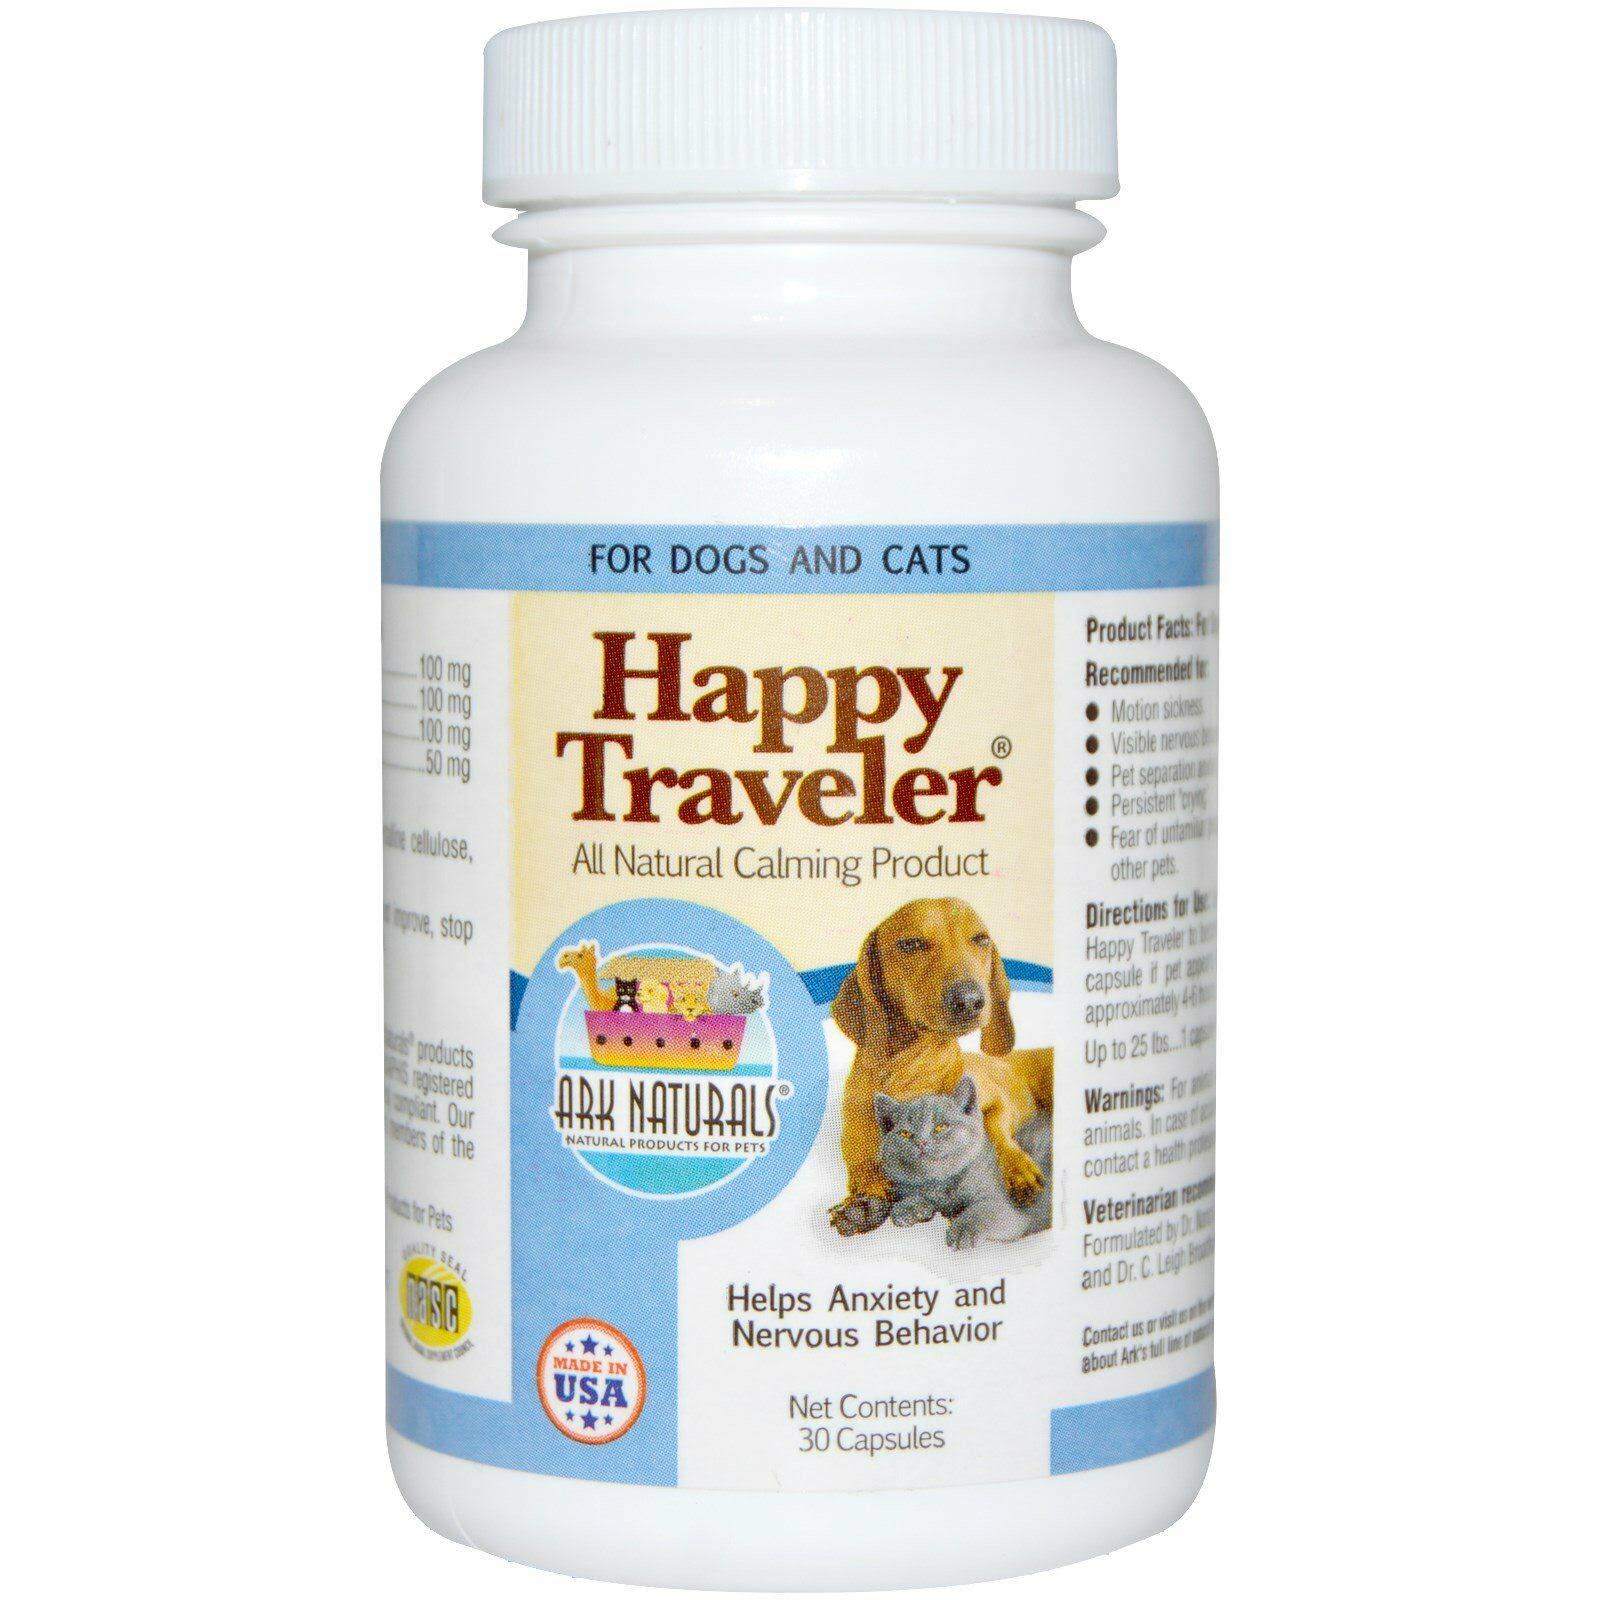 Ark Naturals Happy Traveler Dogs and Cats Supplement - 30 Capsules